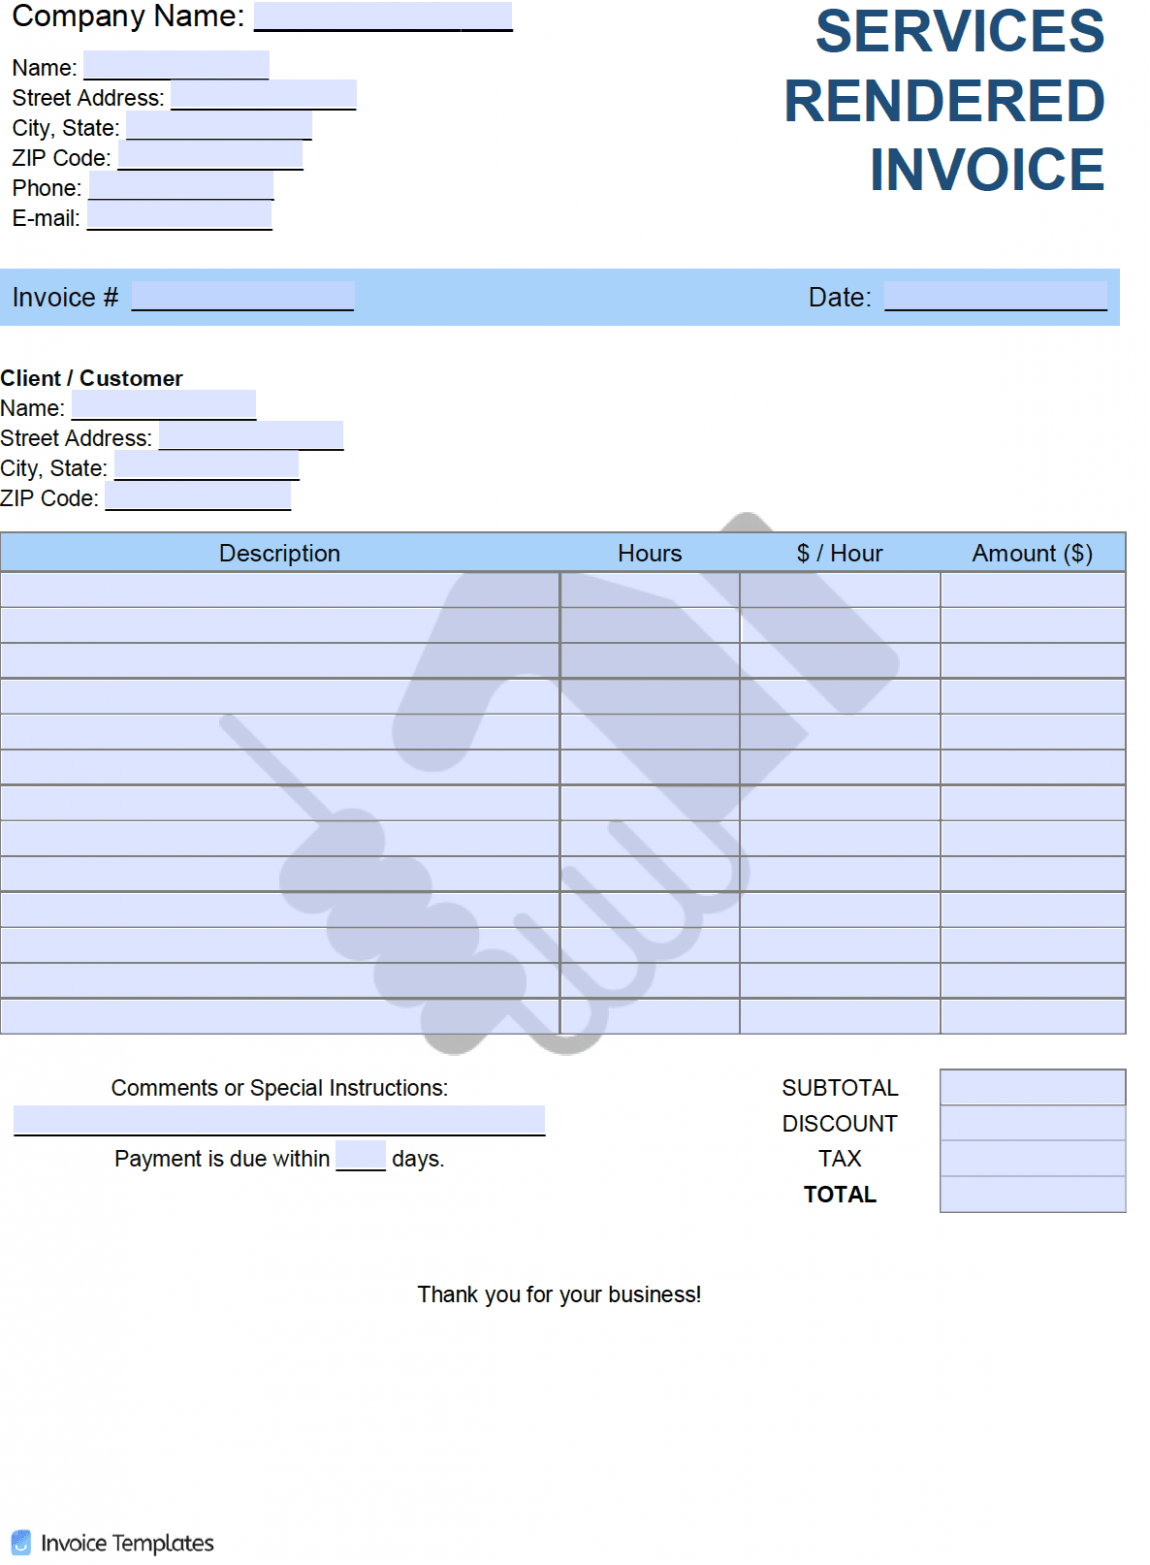 Sample Services Rendered Invoice Template 